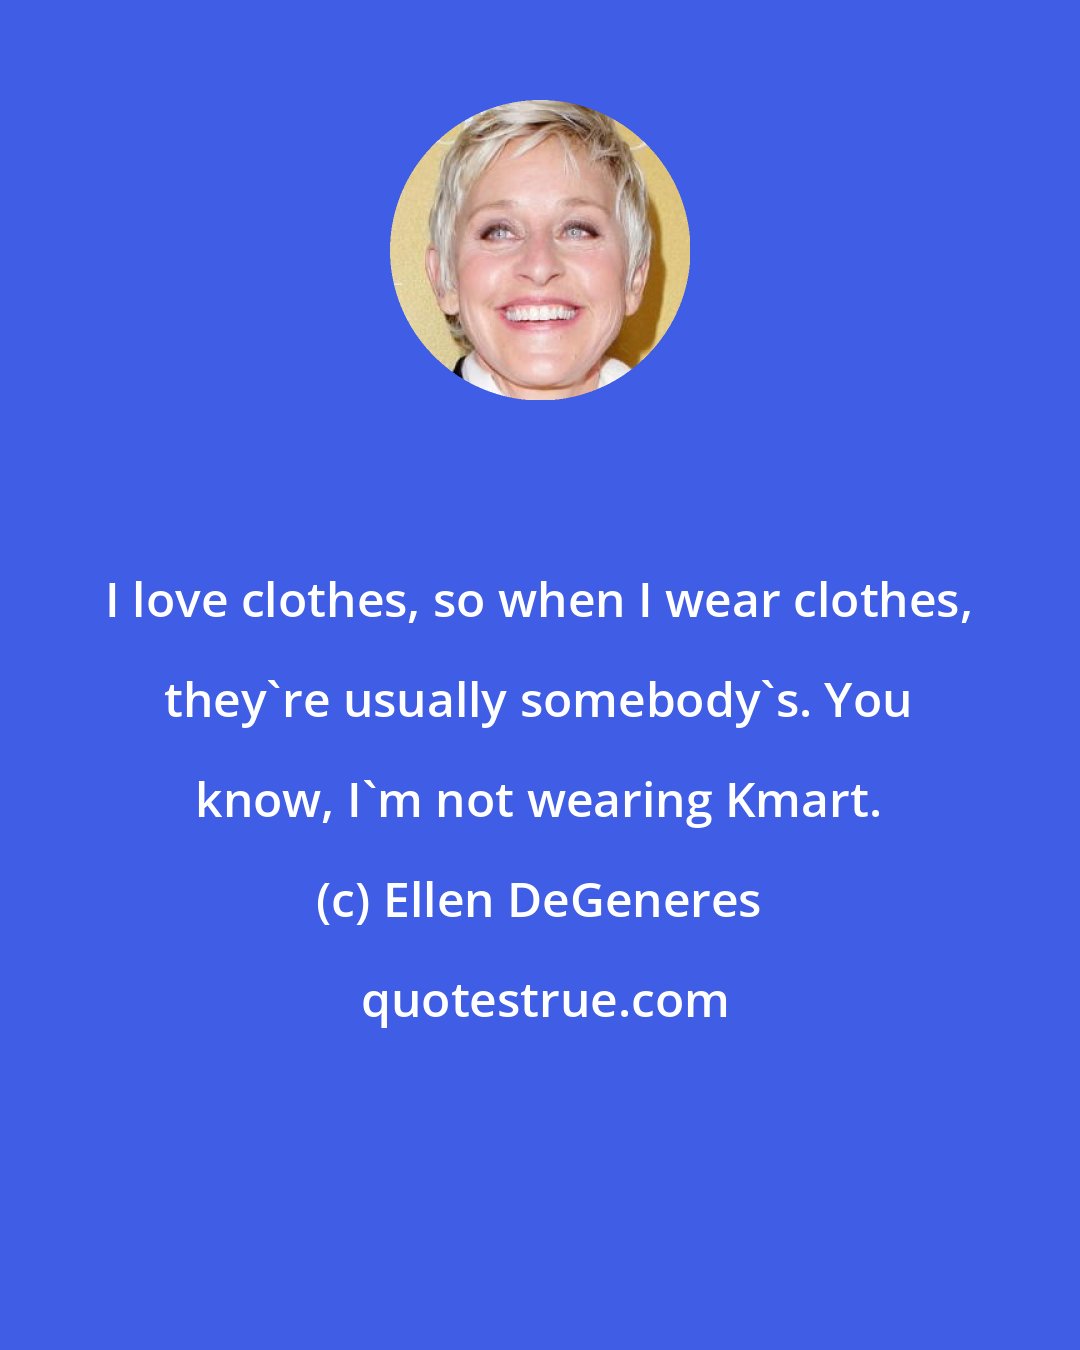 Ellen DeGeneres: I love clothes, so when I wear clothes, they're usually somebody's. You know, I'm not wearing Kmart.